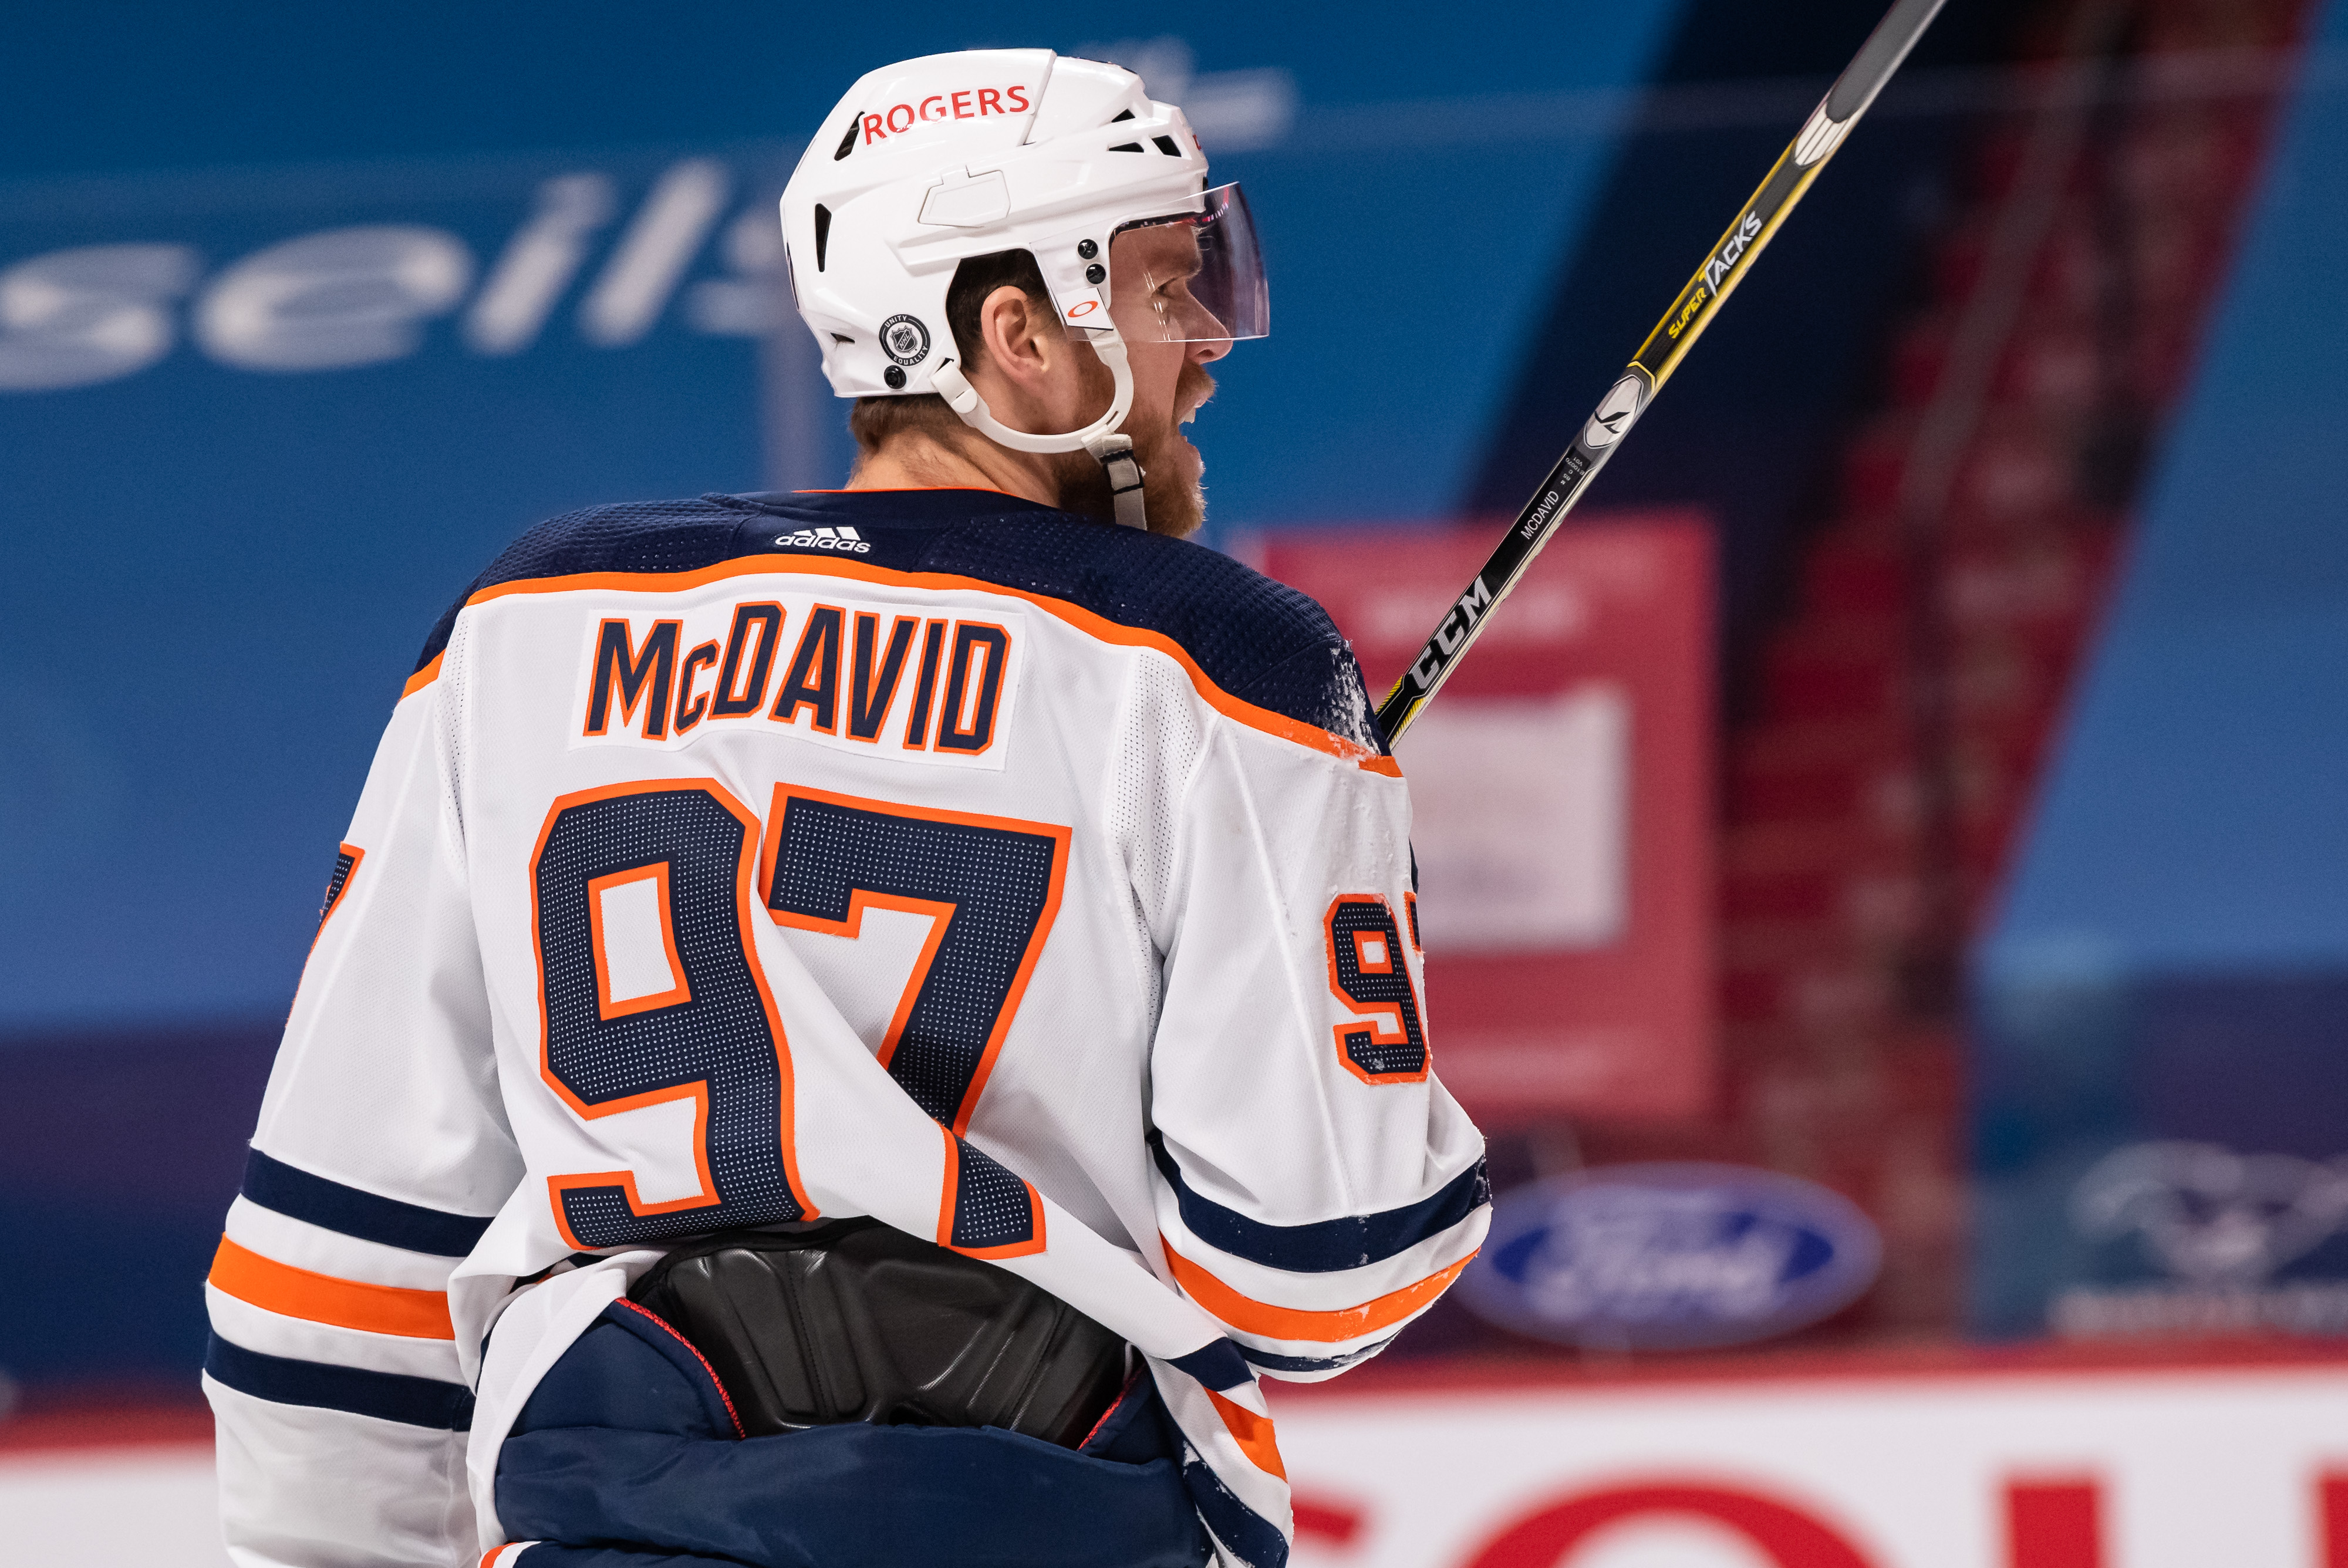 How Many Points Does Mcdavid Have In His Career